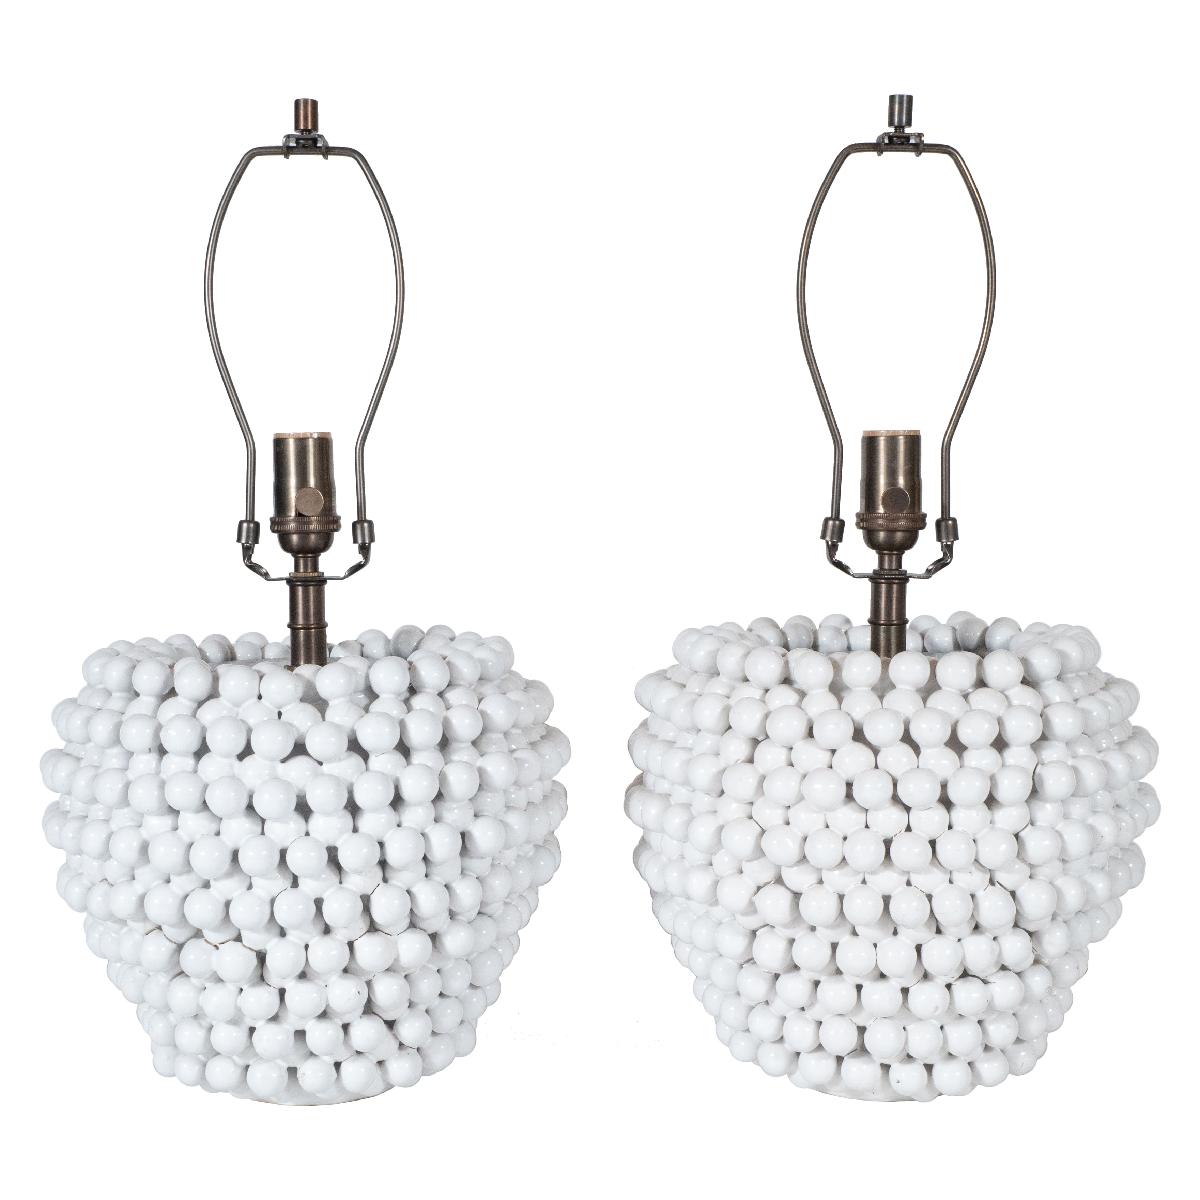 Pair of white glazed ceramic table lamps composed of clustered white balls with patinated brass hardware.